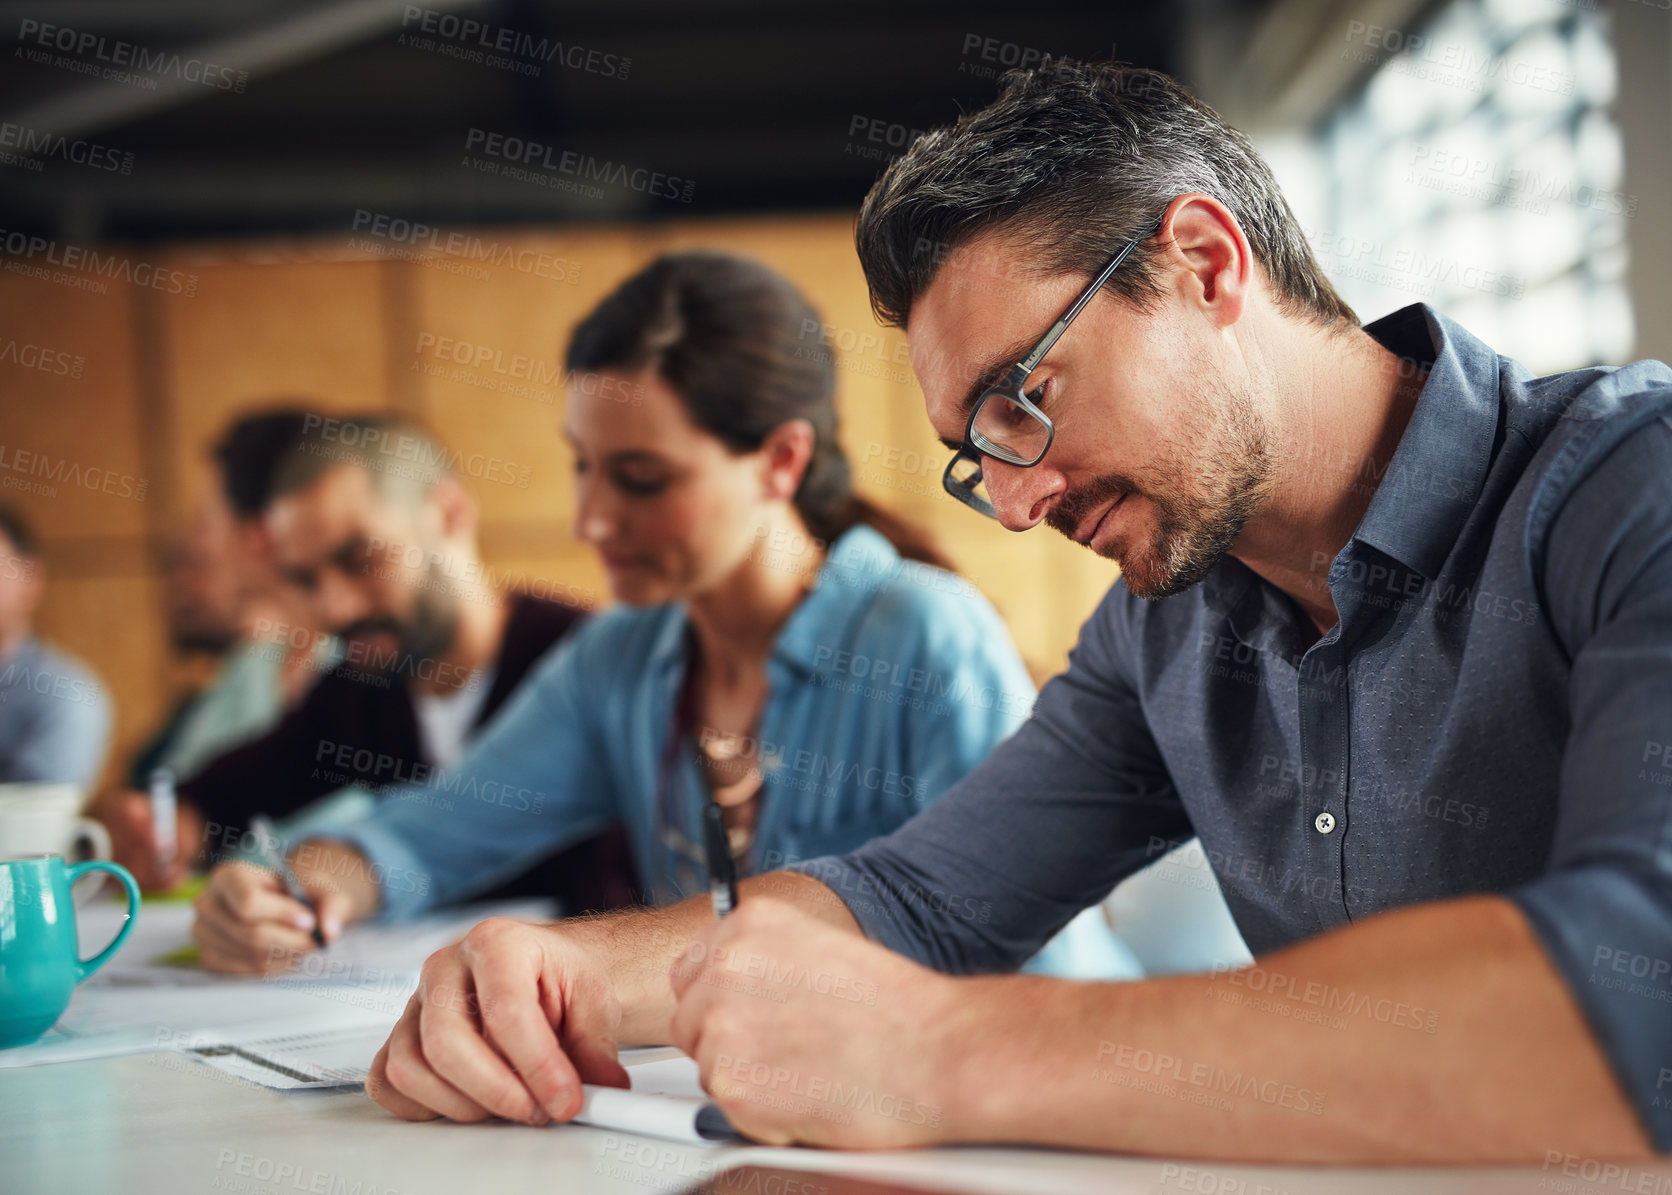 Buy stock photo Shot of a group of colleagues working together at a table in an office